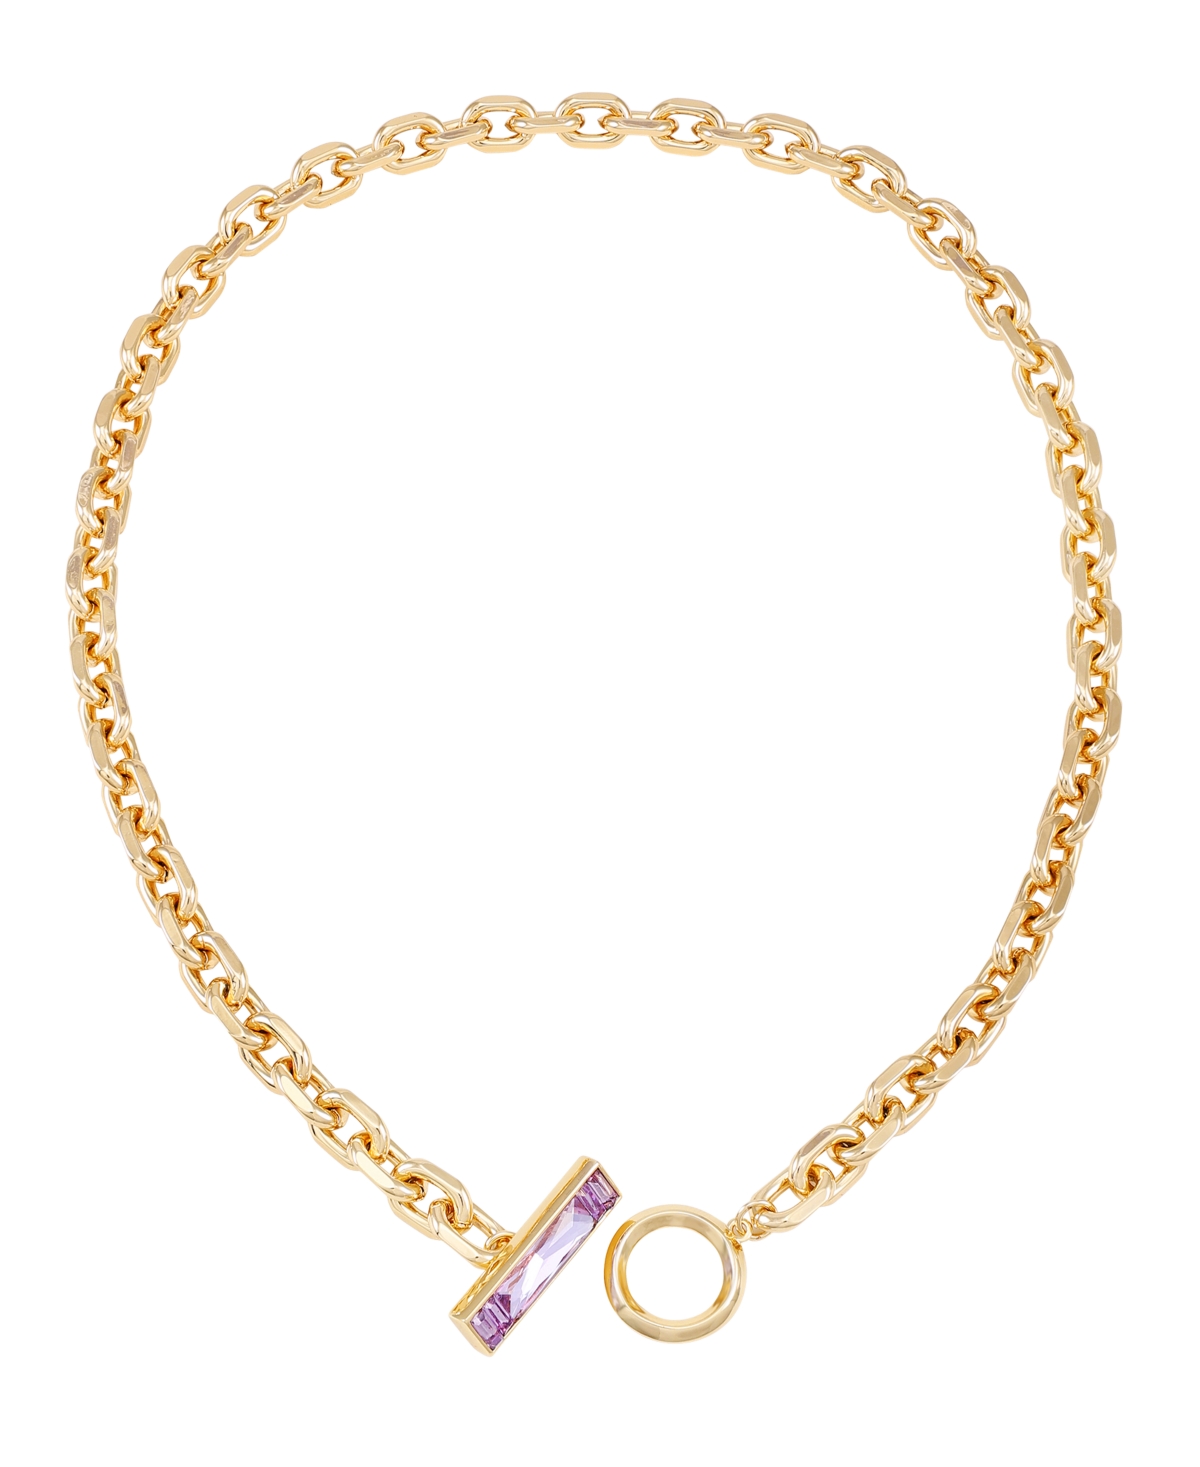 Gold-Tone Glass Stone Toggle Necklace, 18" - Gold